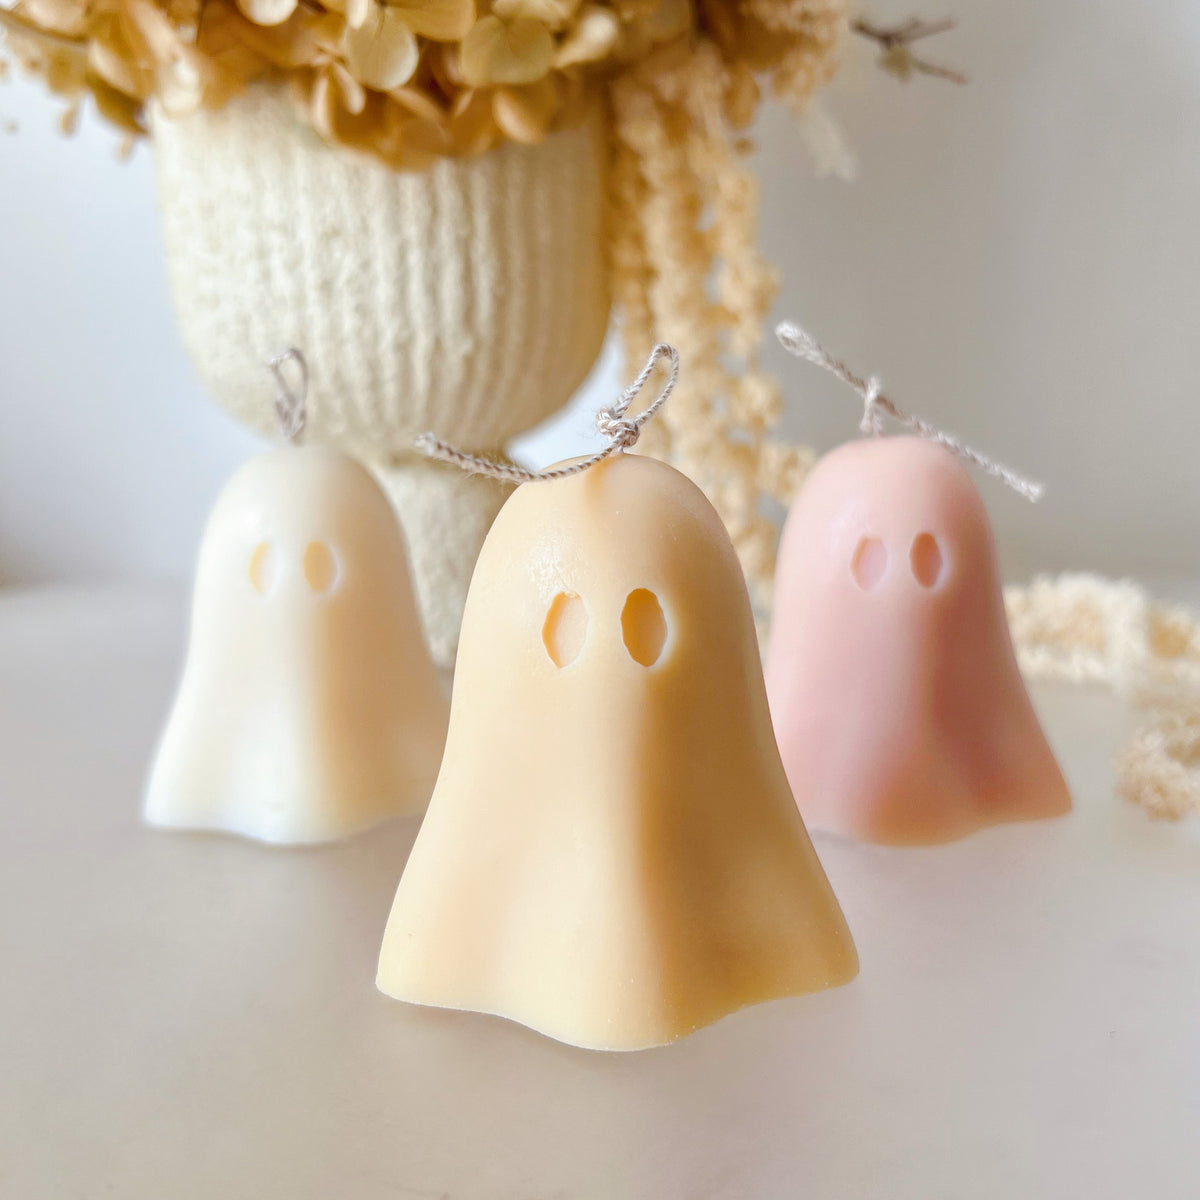 Halloween Collection, handmade little ghost candles by LMJ Candles